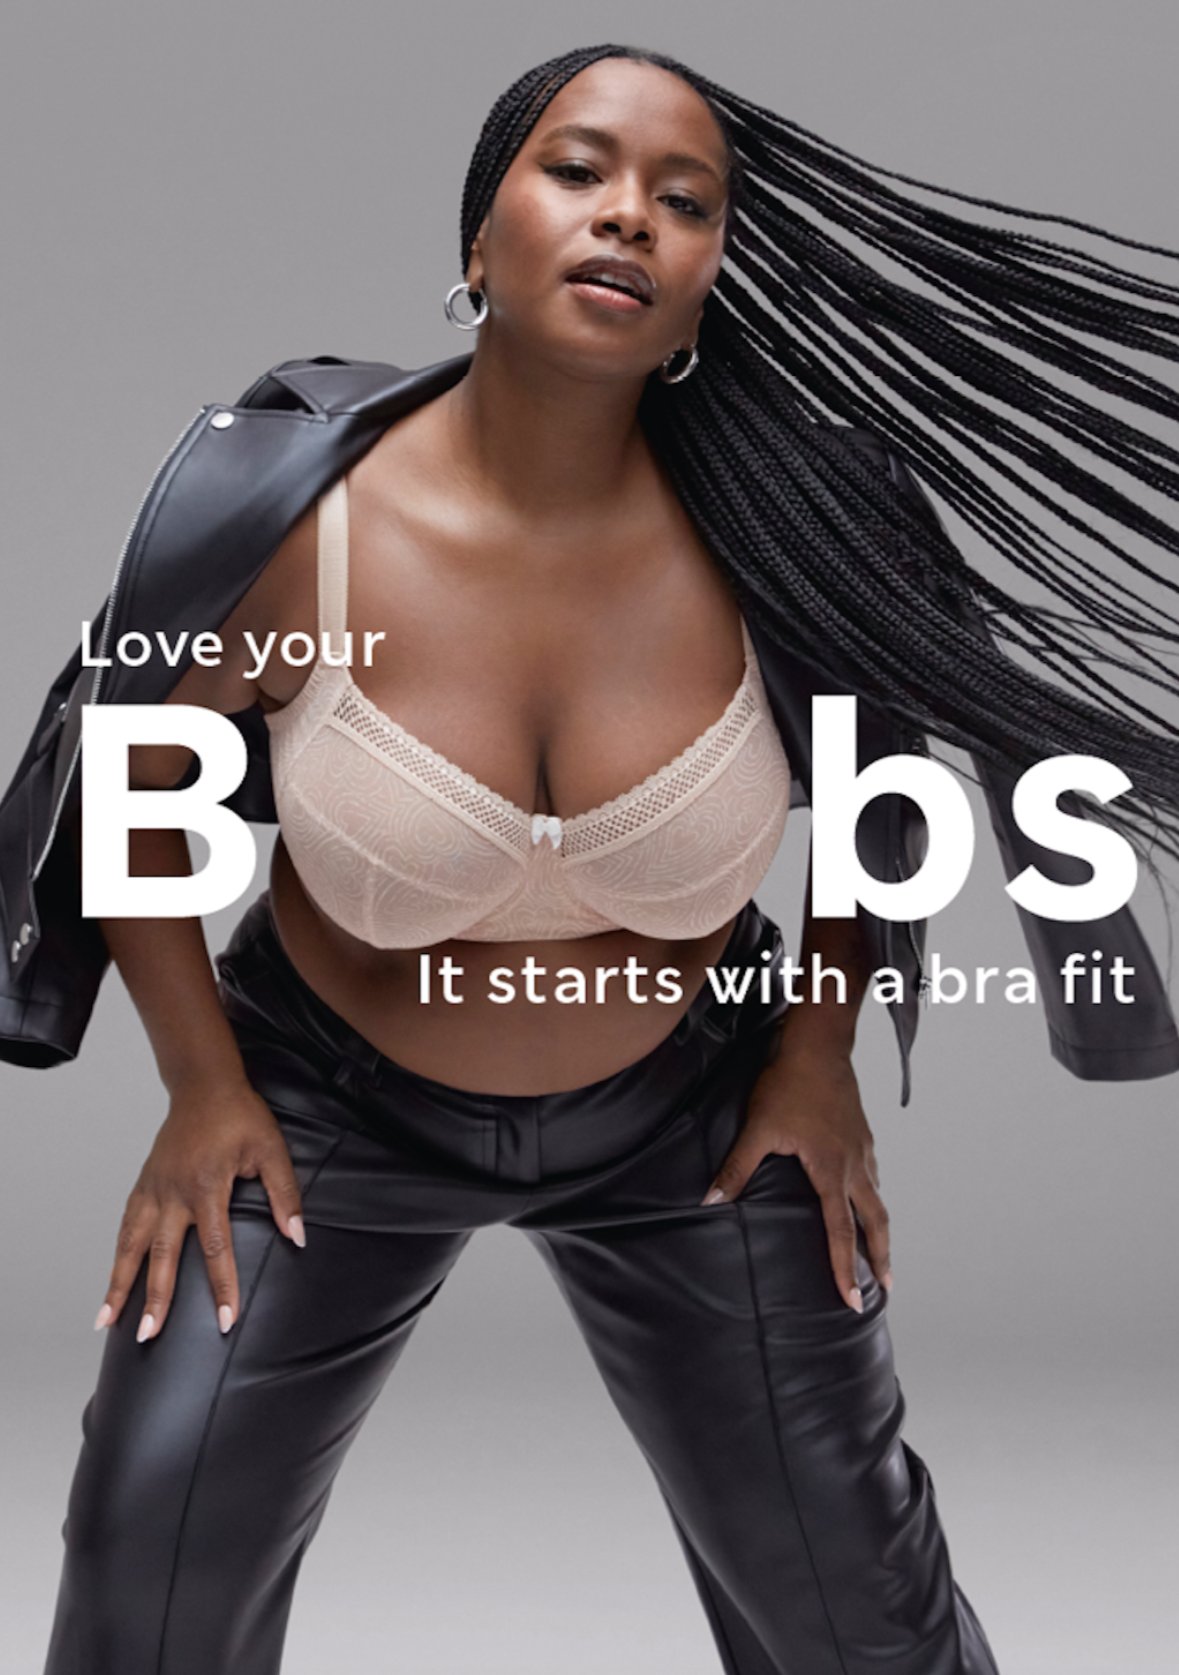 The Ad Professor on X: 9 creative social media ads I've collected this  week: 1. M&S Bras  / X